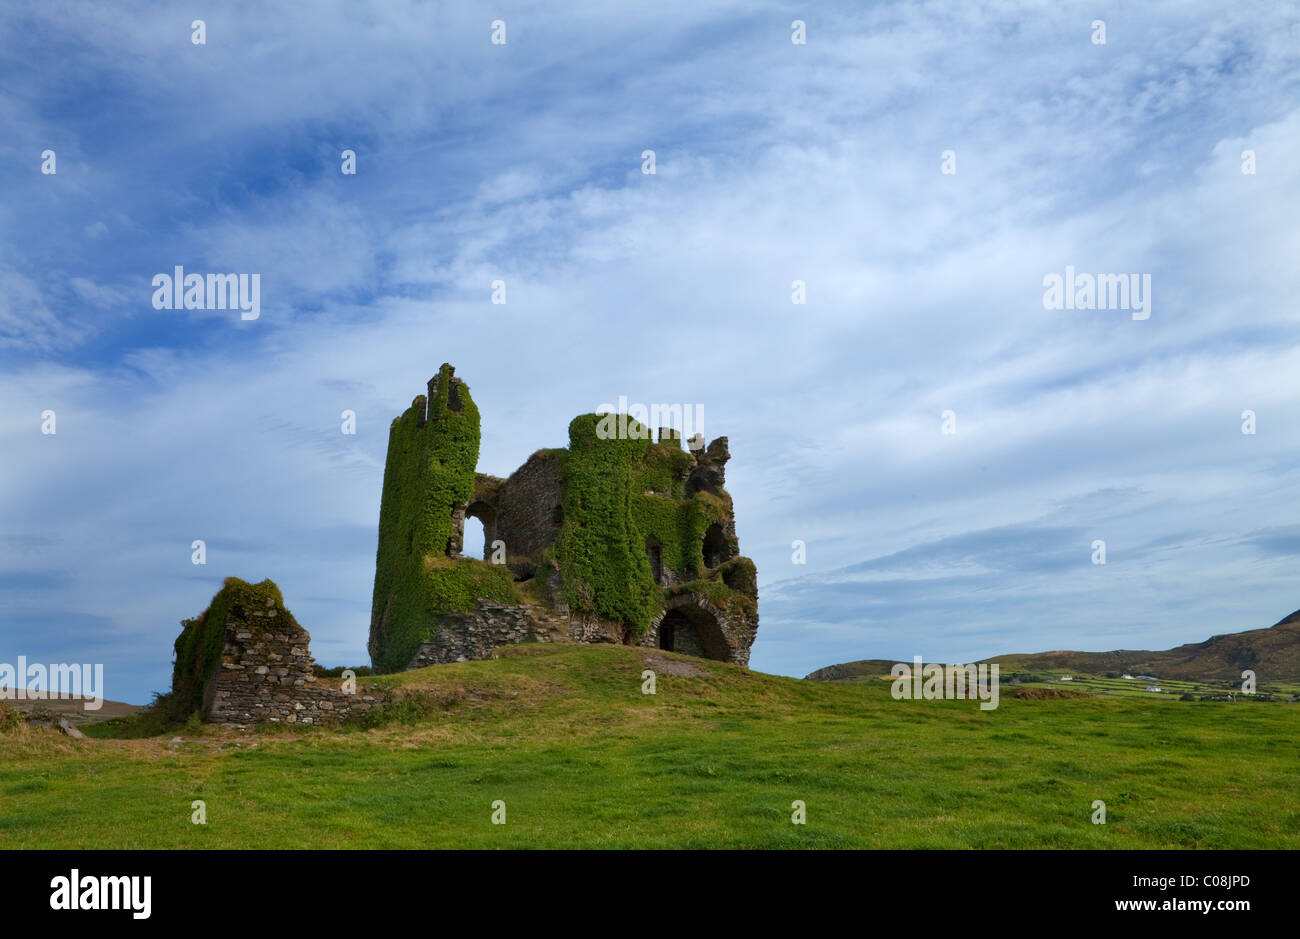 The Ruins of 16th Century Ballycarbery Castle, Near Cahirciveen, The Ring of Kerry, County Kerry, Ireland Stock Photo